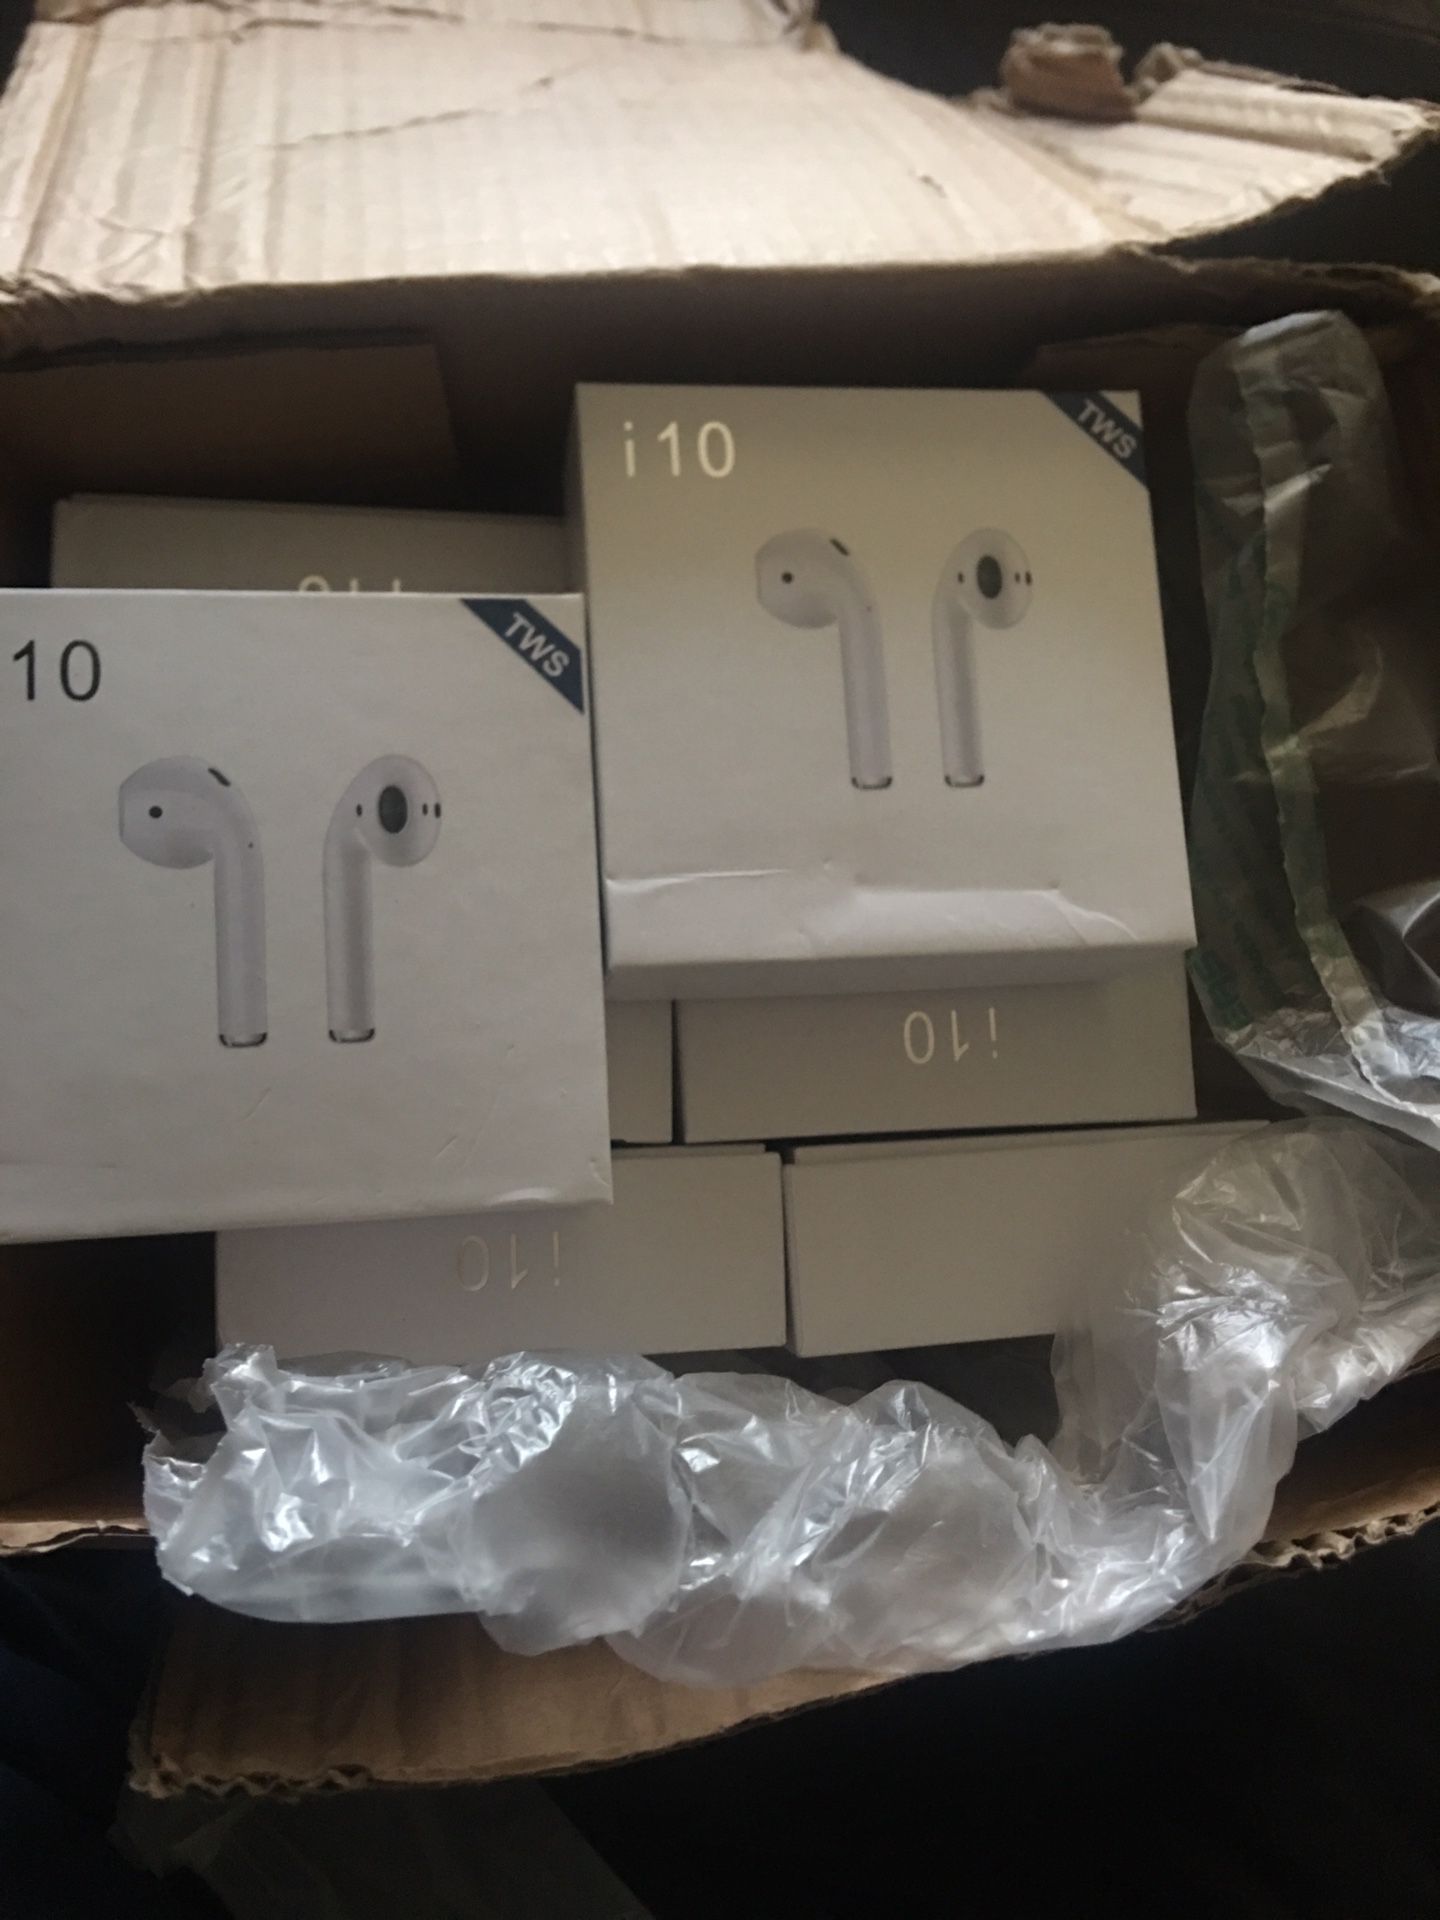 i10 Airpods